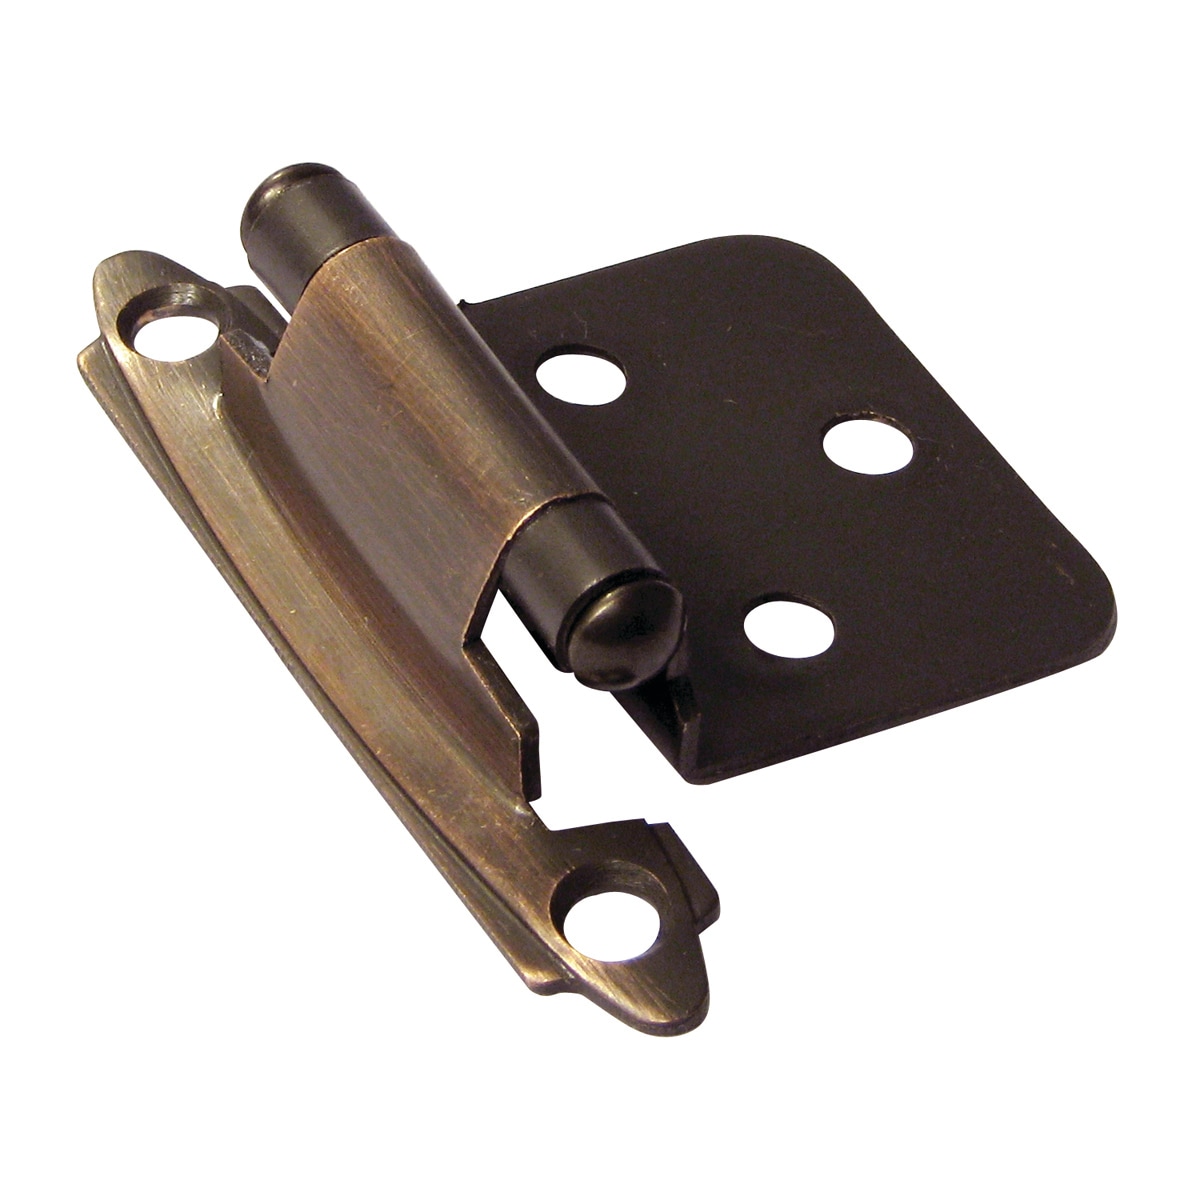 H0103Bl-500 Oil Rubbed Bronze Self Closing Overlay HInge Lot of 2 